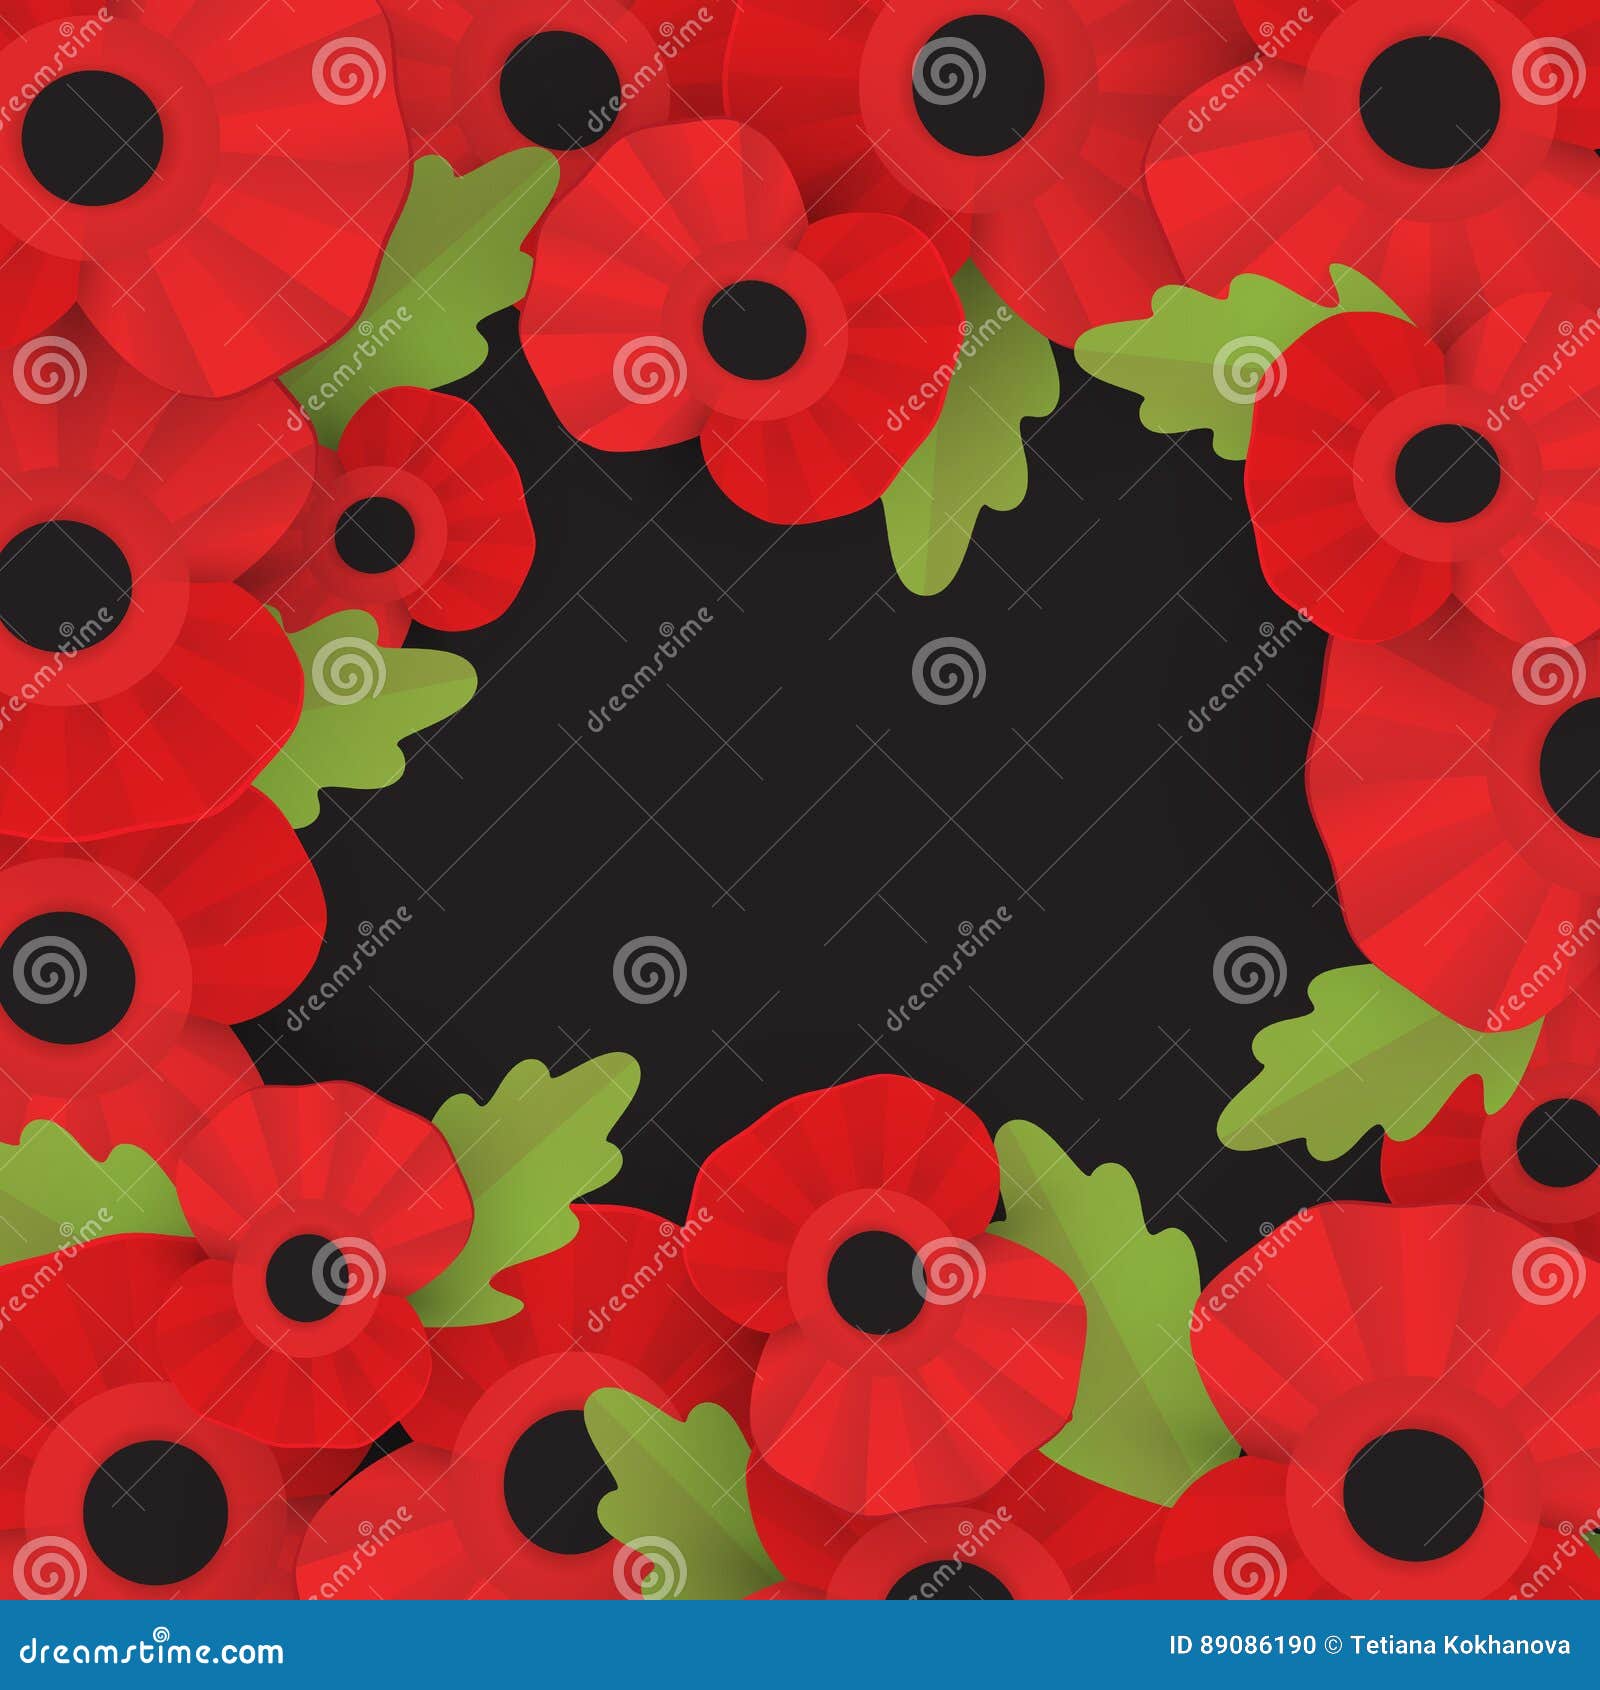 the remembrance poppy - poppy appeal.